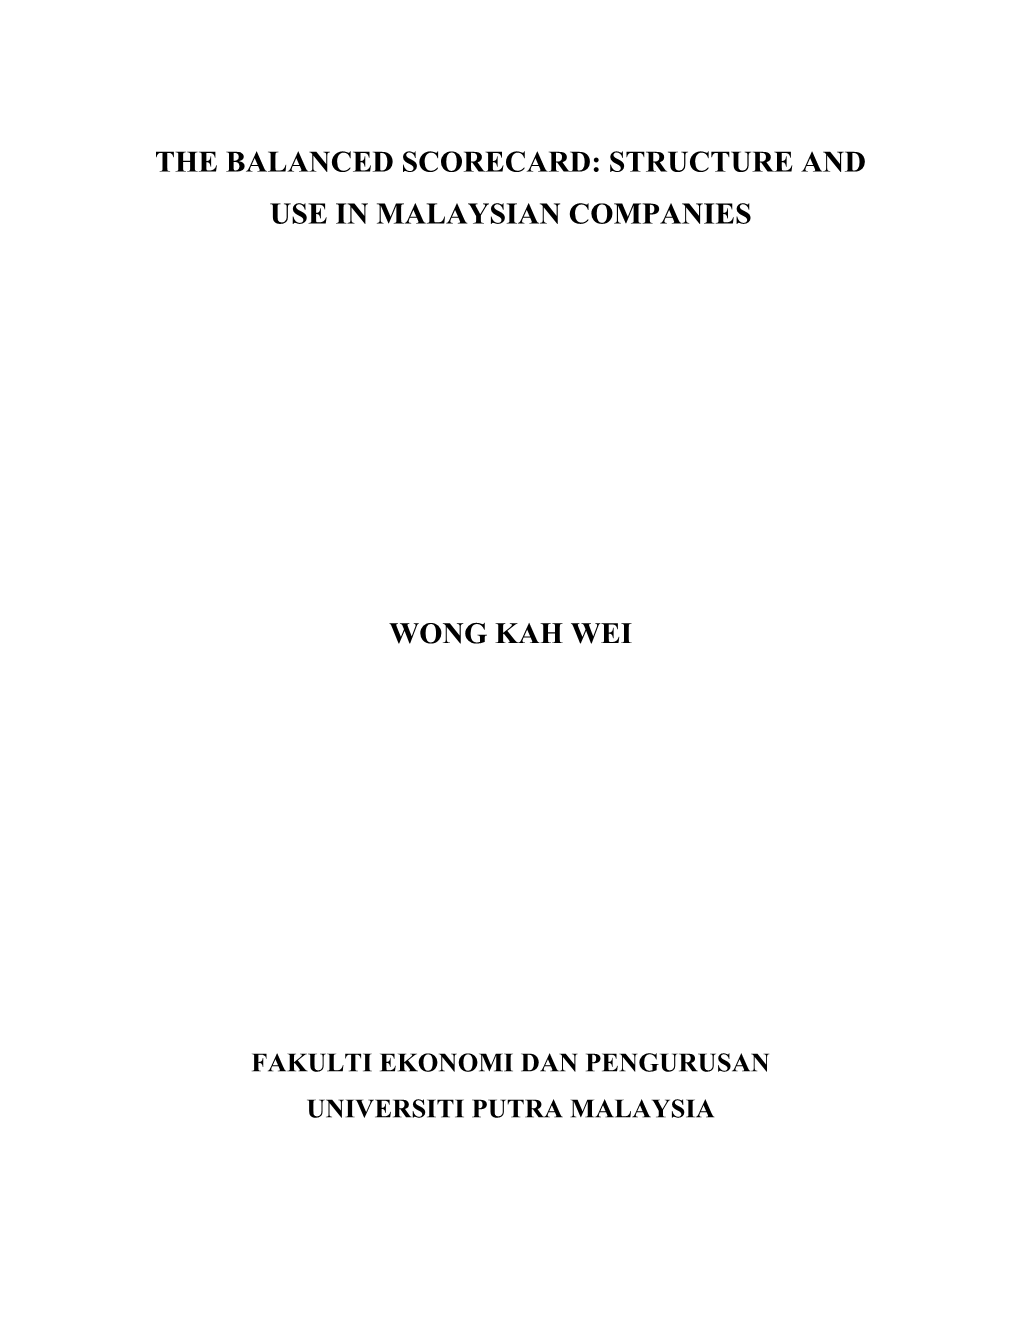 The Balanced Scorecard: Structure and Use in Malaysiancompanies